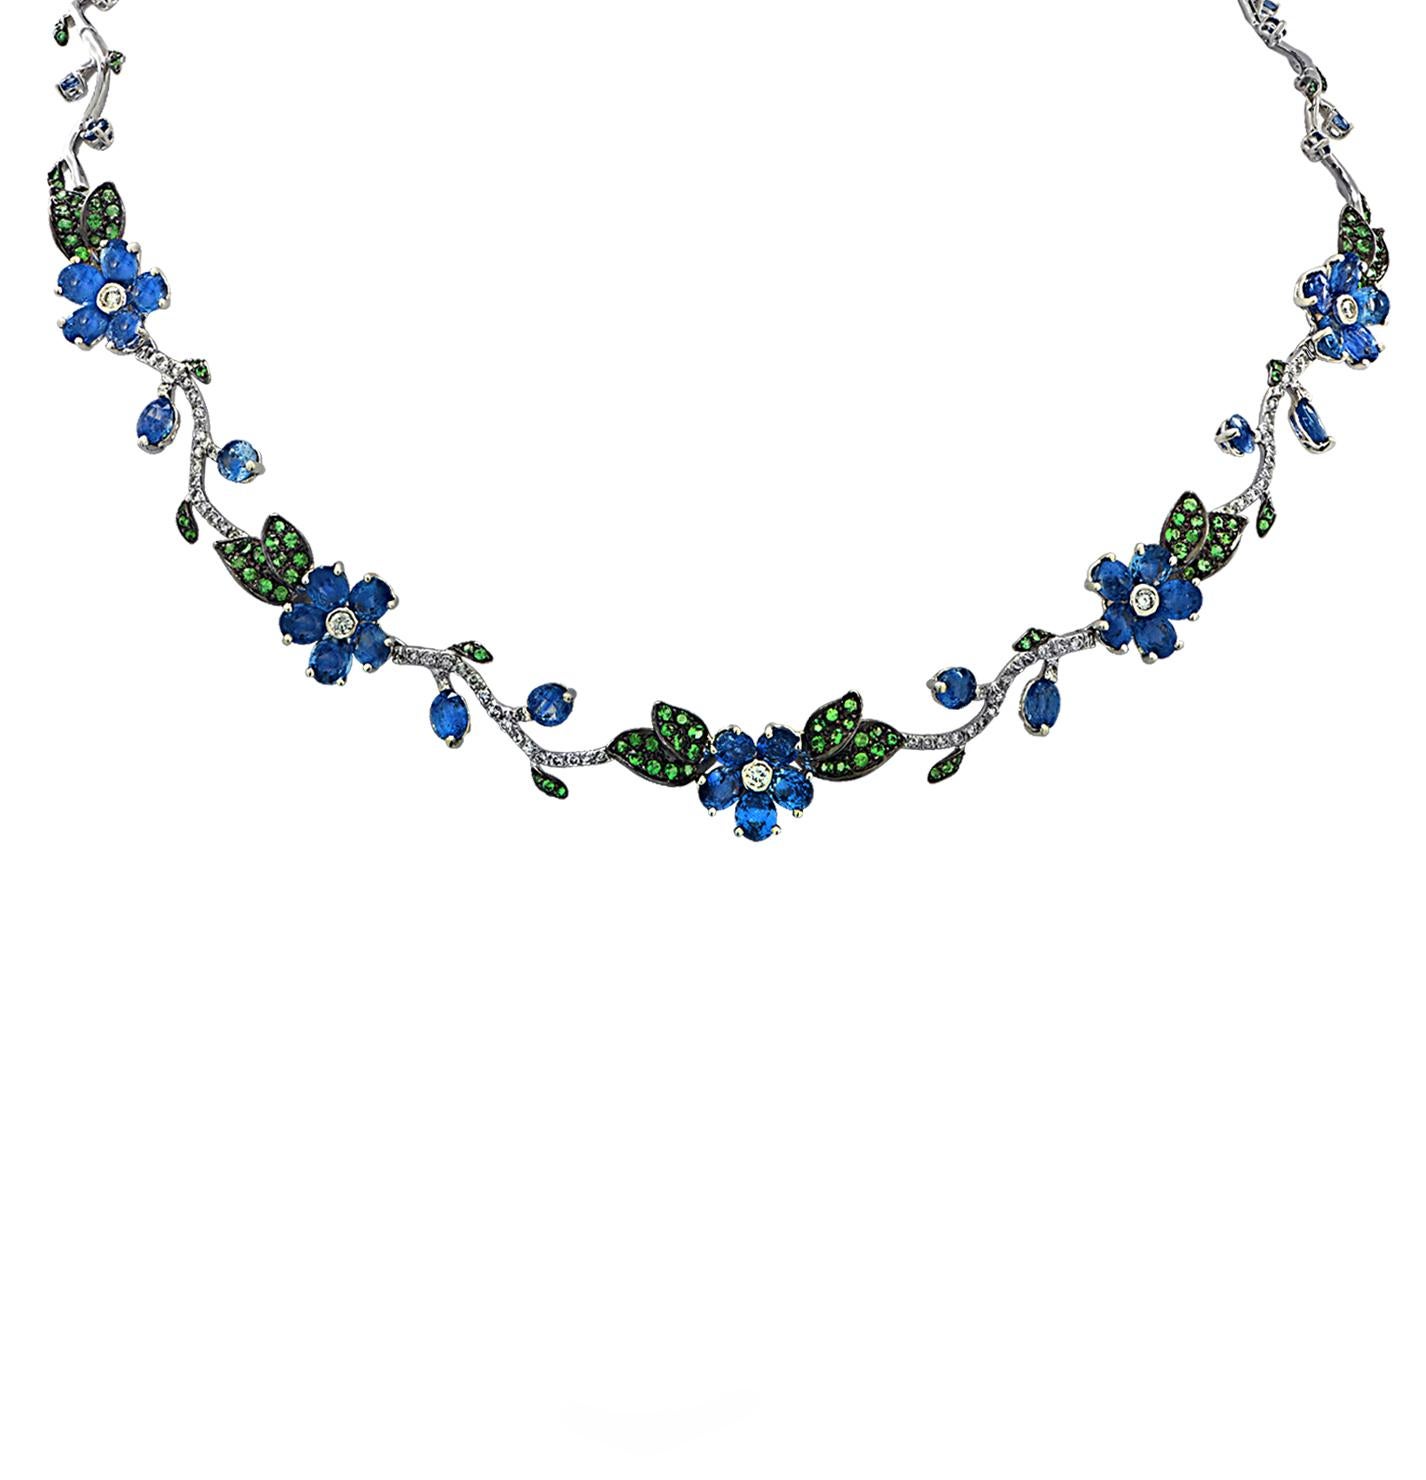 Enchanting sapphire, diamond and tsavorite necklace and earring set crafted in 18 karat white gold featuring 77 mixed cut Blue Sapphires weighing approximately 33.16 carats total, 224 round Green Tsavorite Garnets weighing approximately 2.68 carats